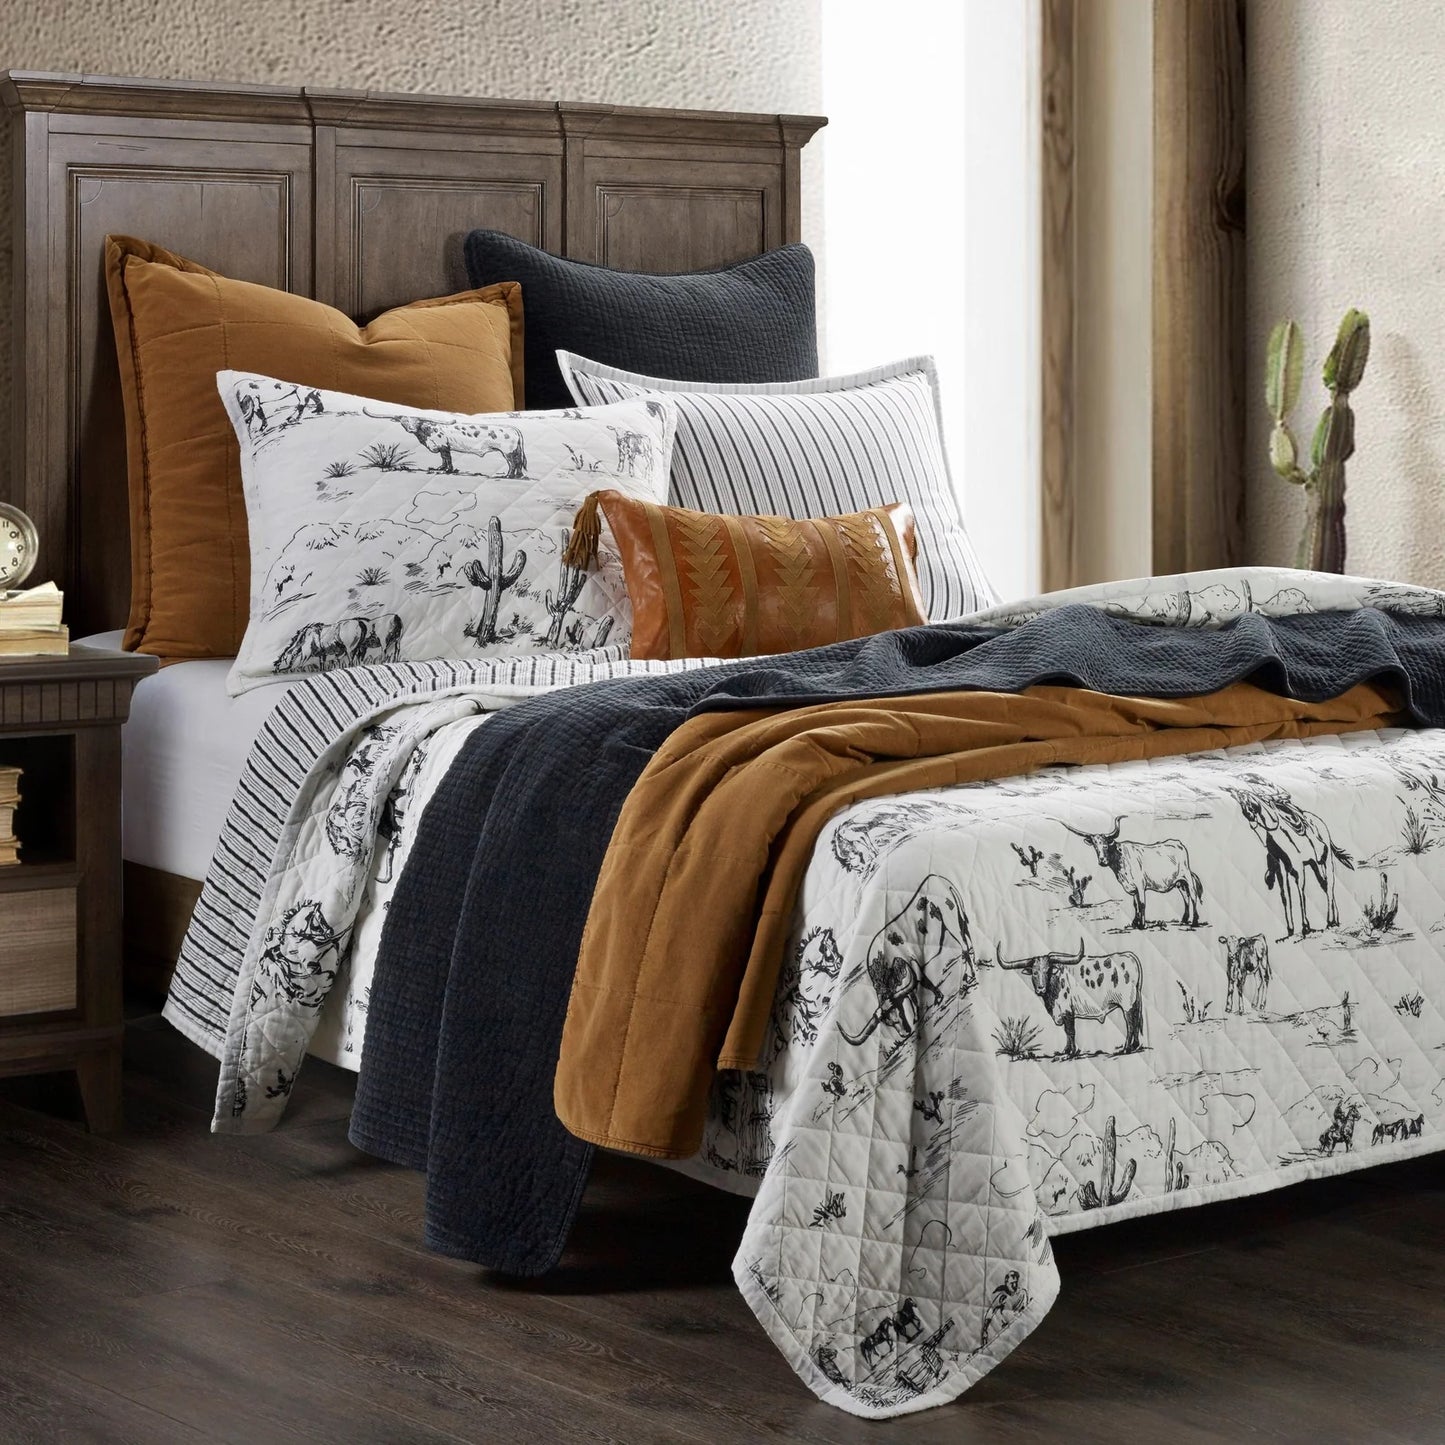 Ranch Life Western Toile Reversible Quilt Set